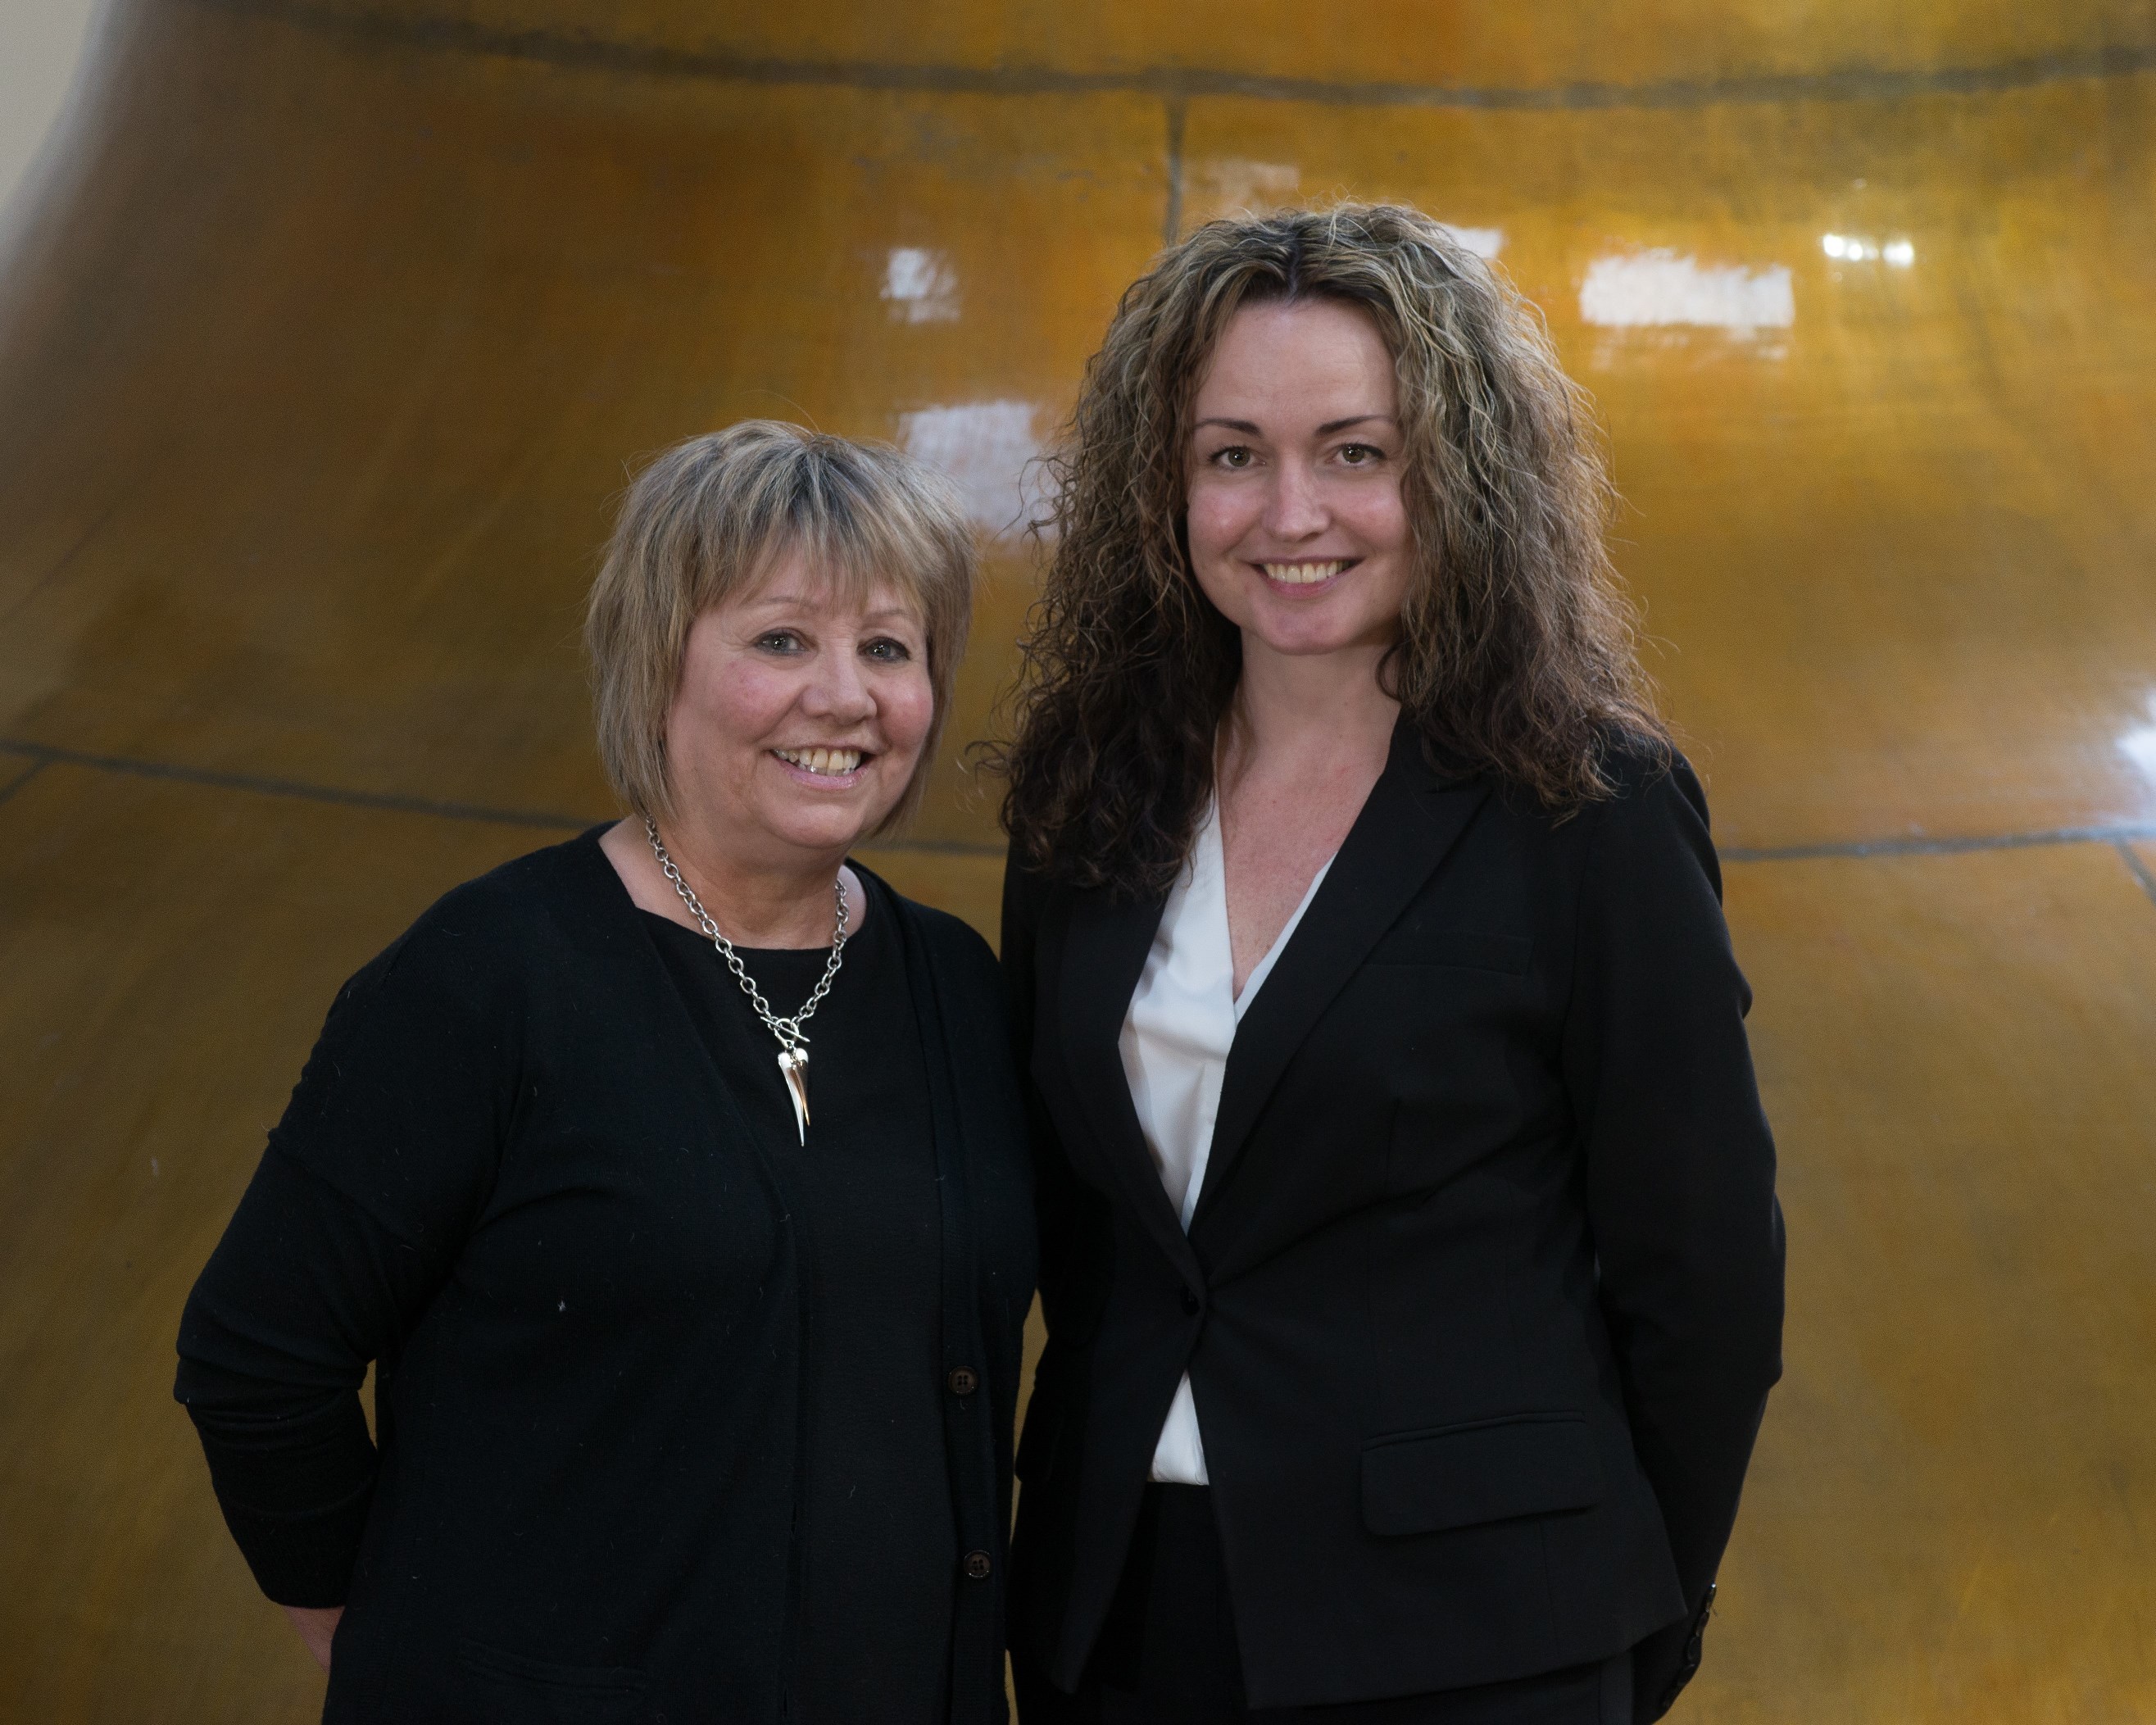 Linda Mellis and Gill Reid have been appointed directors of the Spirit of Speyside Whisky Festival.